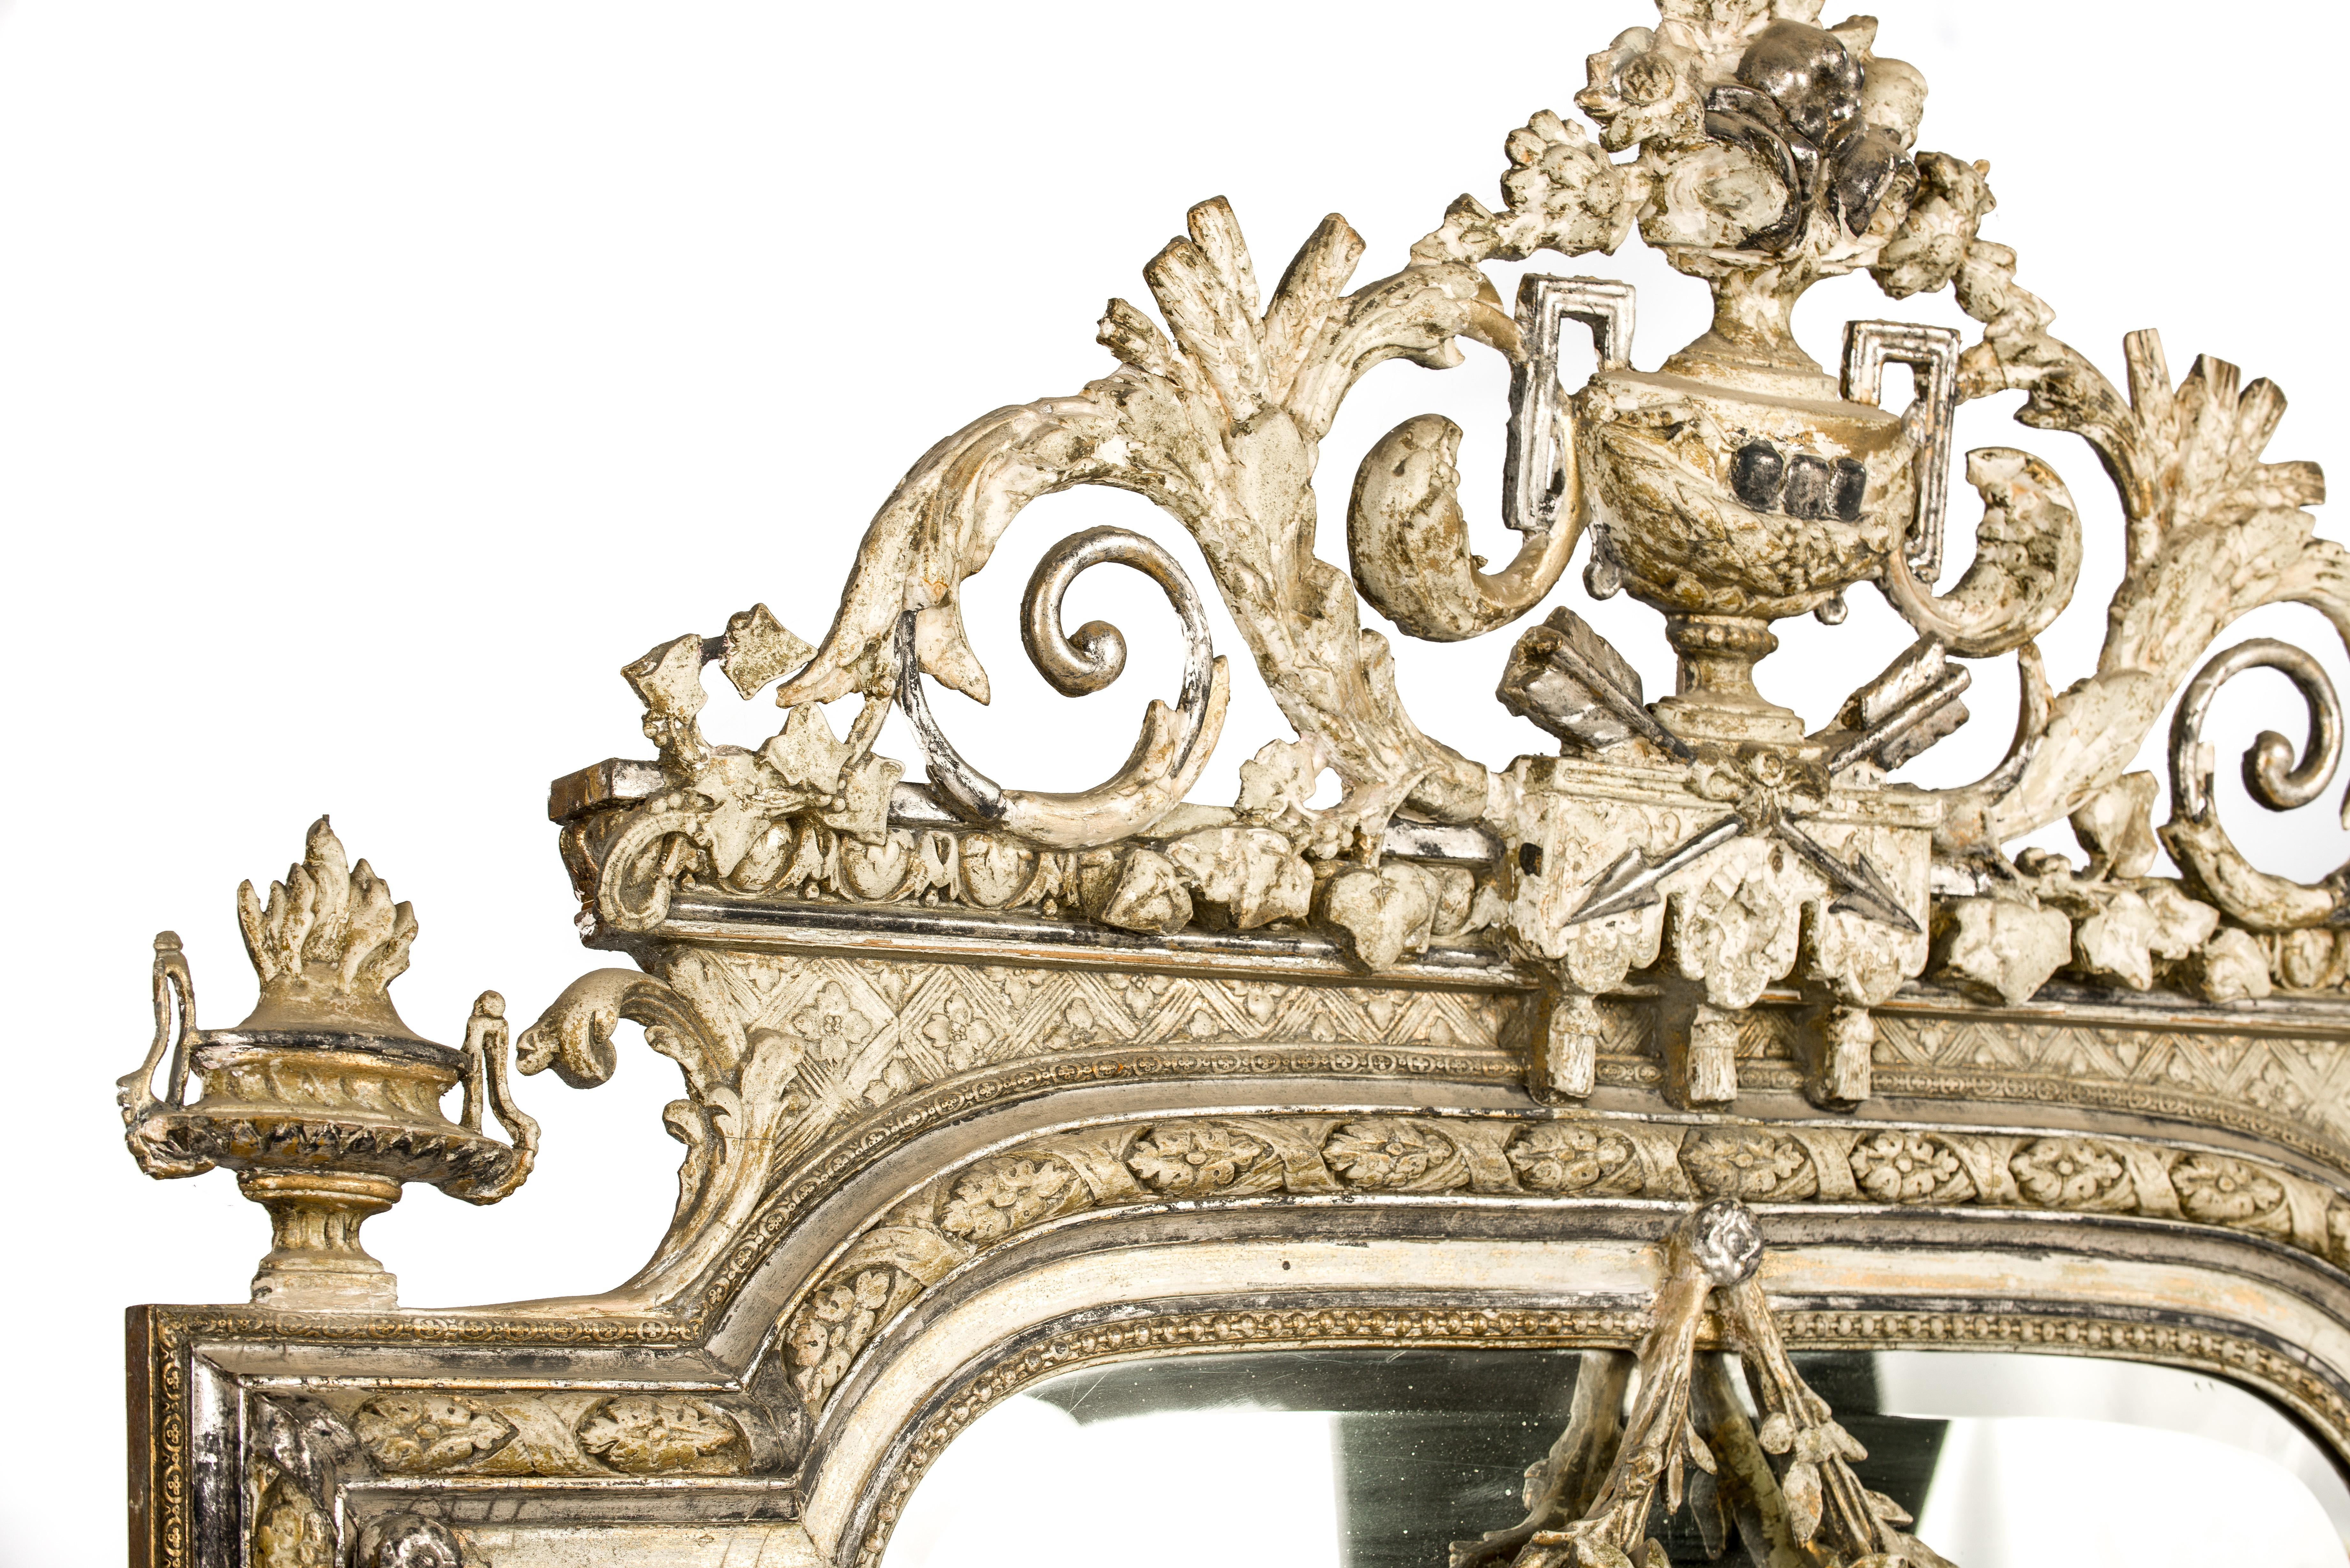 An impressive and rich decorated Louis XVI mirror that was made in Northern France in 1905. 
The mirror frame was made of solid pine, has a segment arched top, and was decorated with cast ornaments. The ornate crest features many classical elements